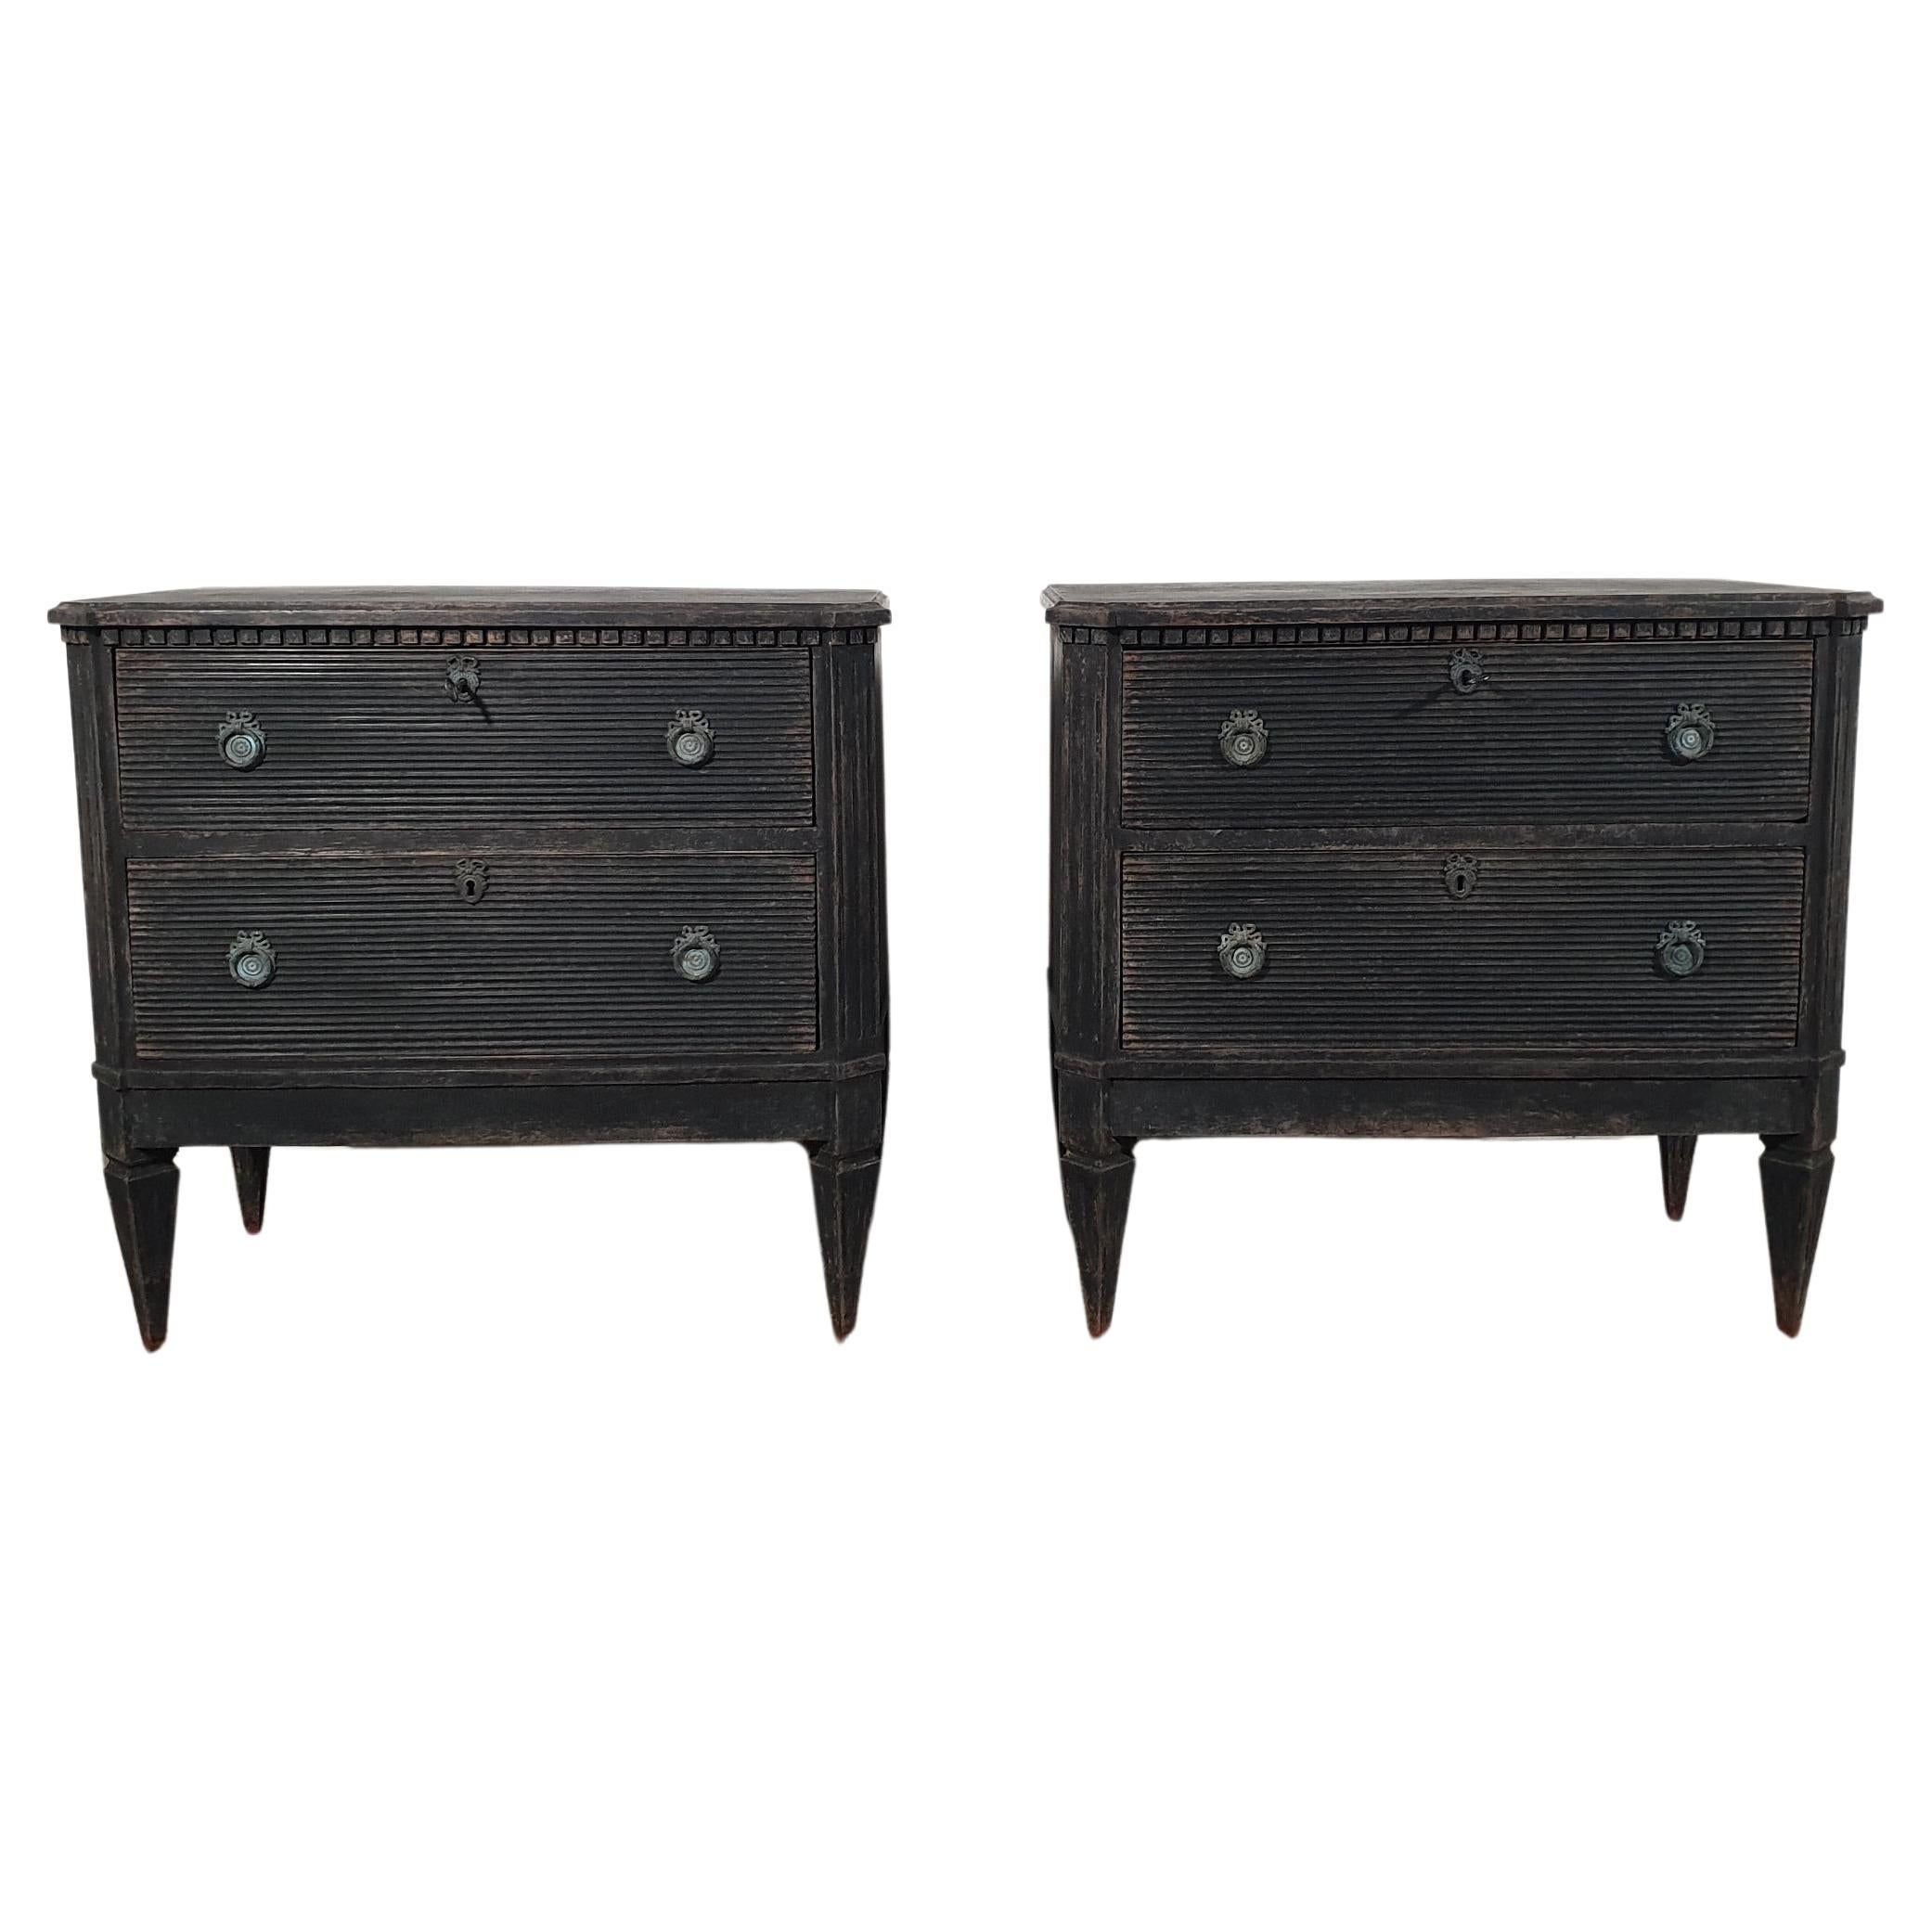 Pair of Swedish Gustavian Style 1870s Painted Chests with Two Fluted Drawers